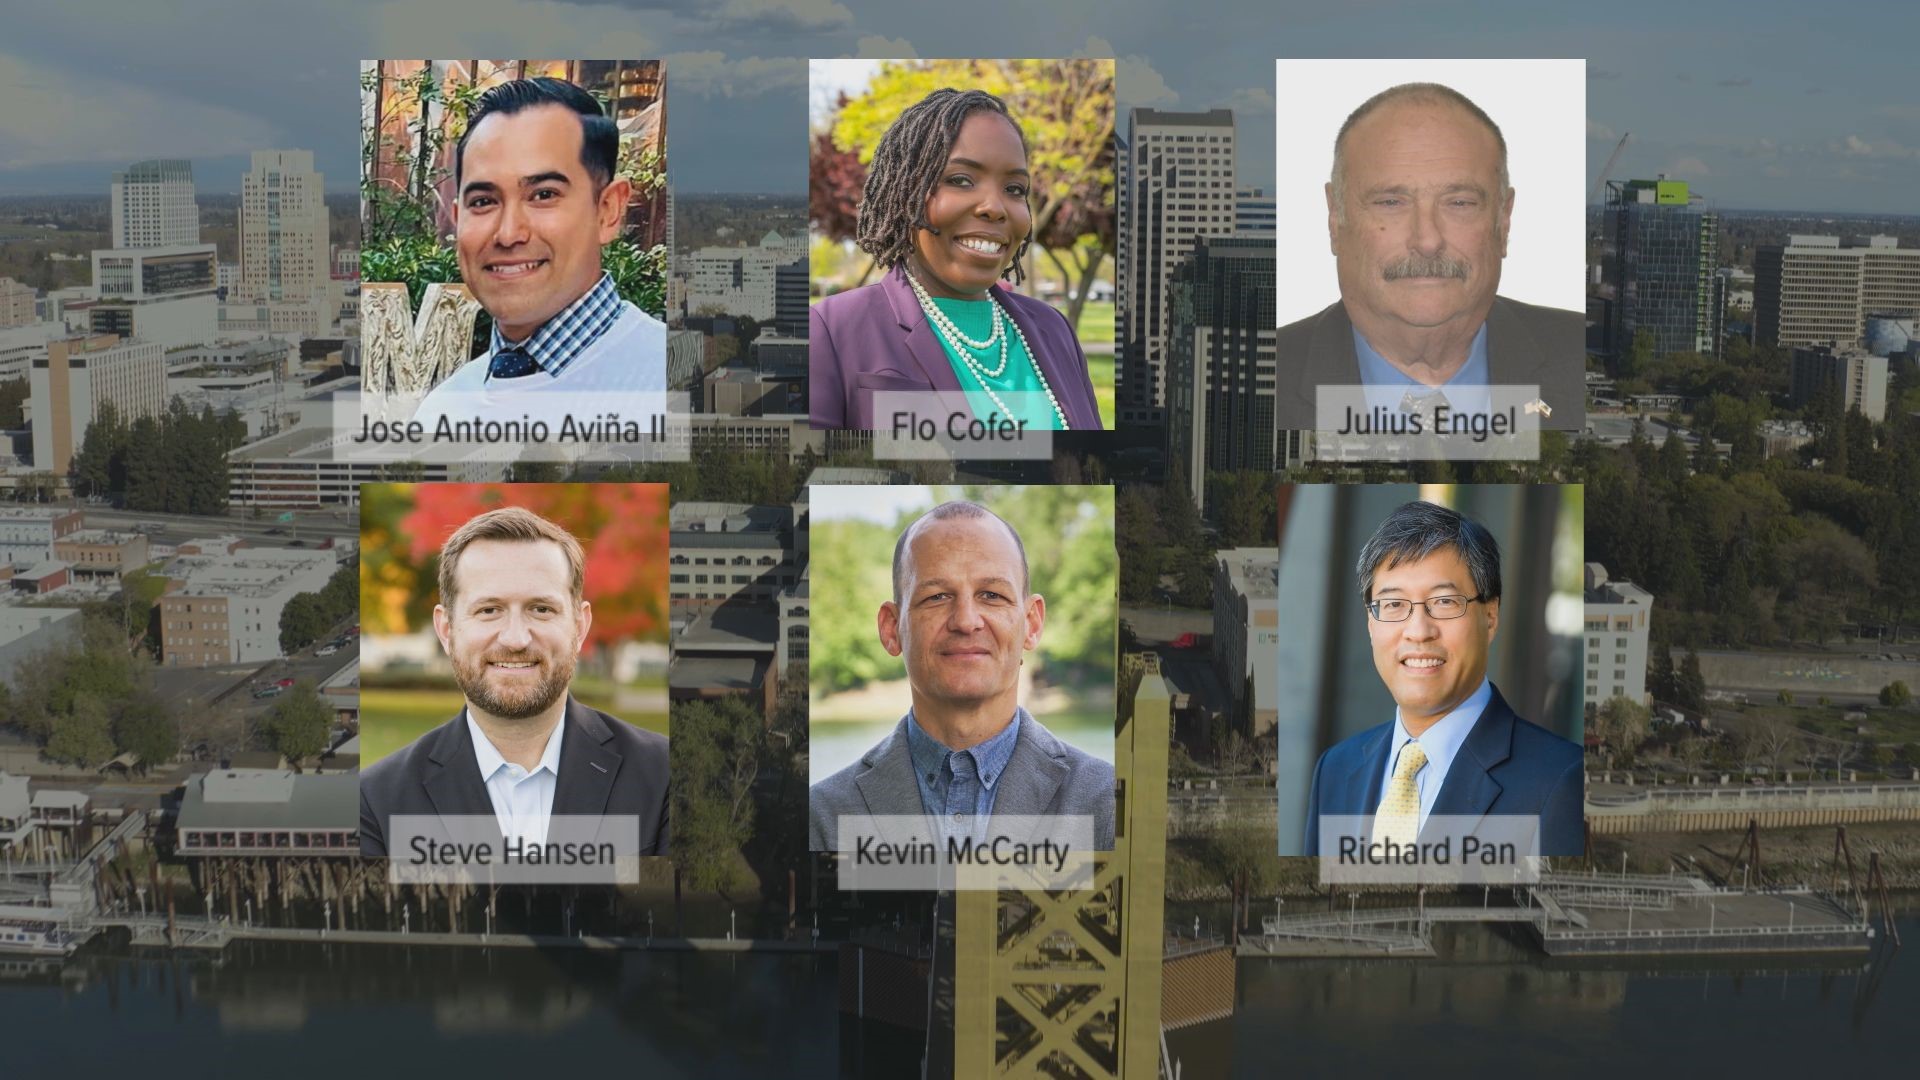 At a forum Thursday night, candidates vying to become Sacramento's next mayor weighed in on major issues facing the city.